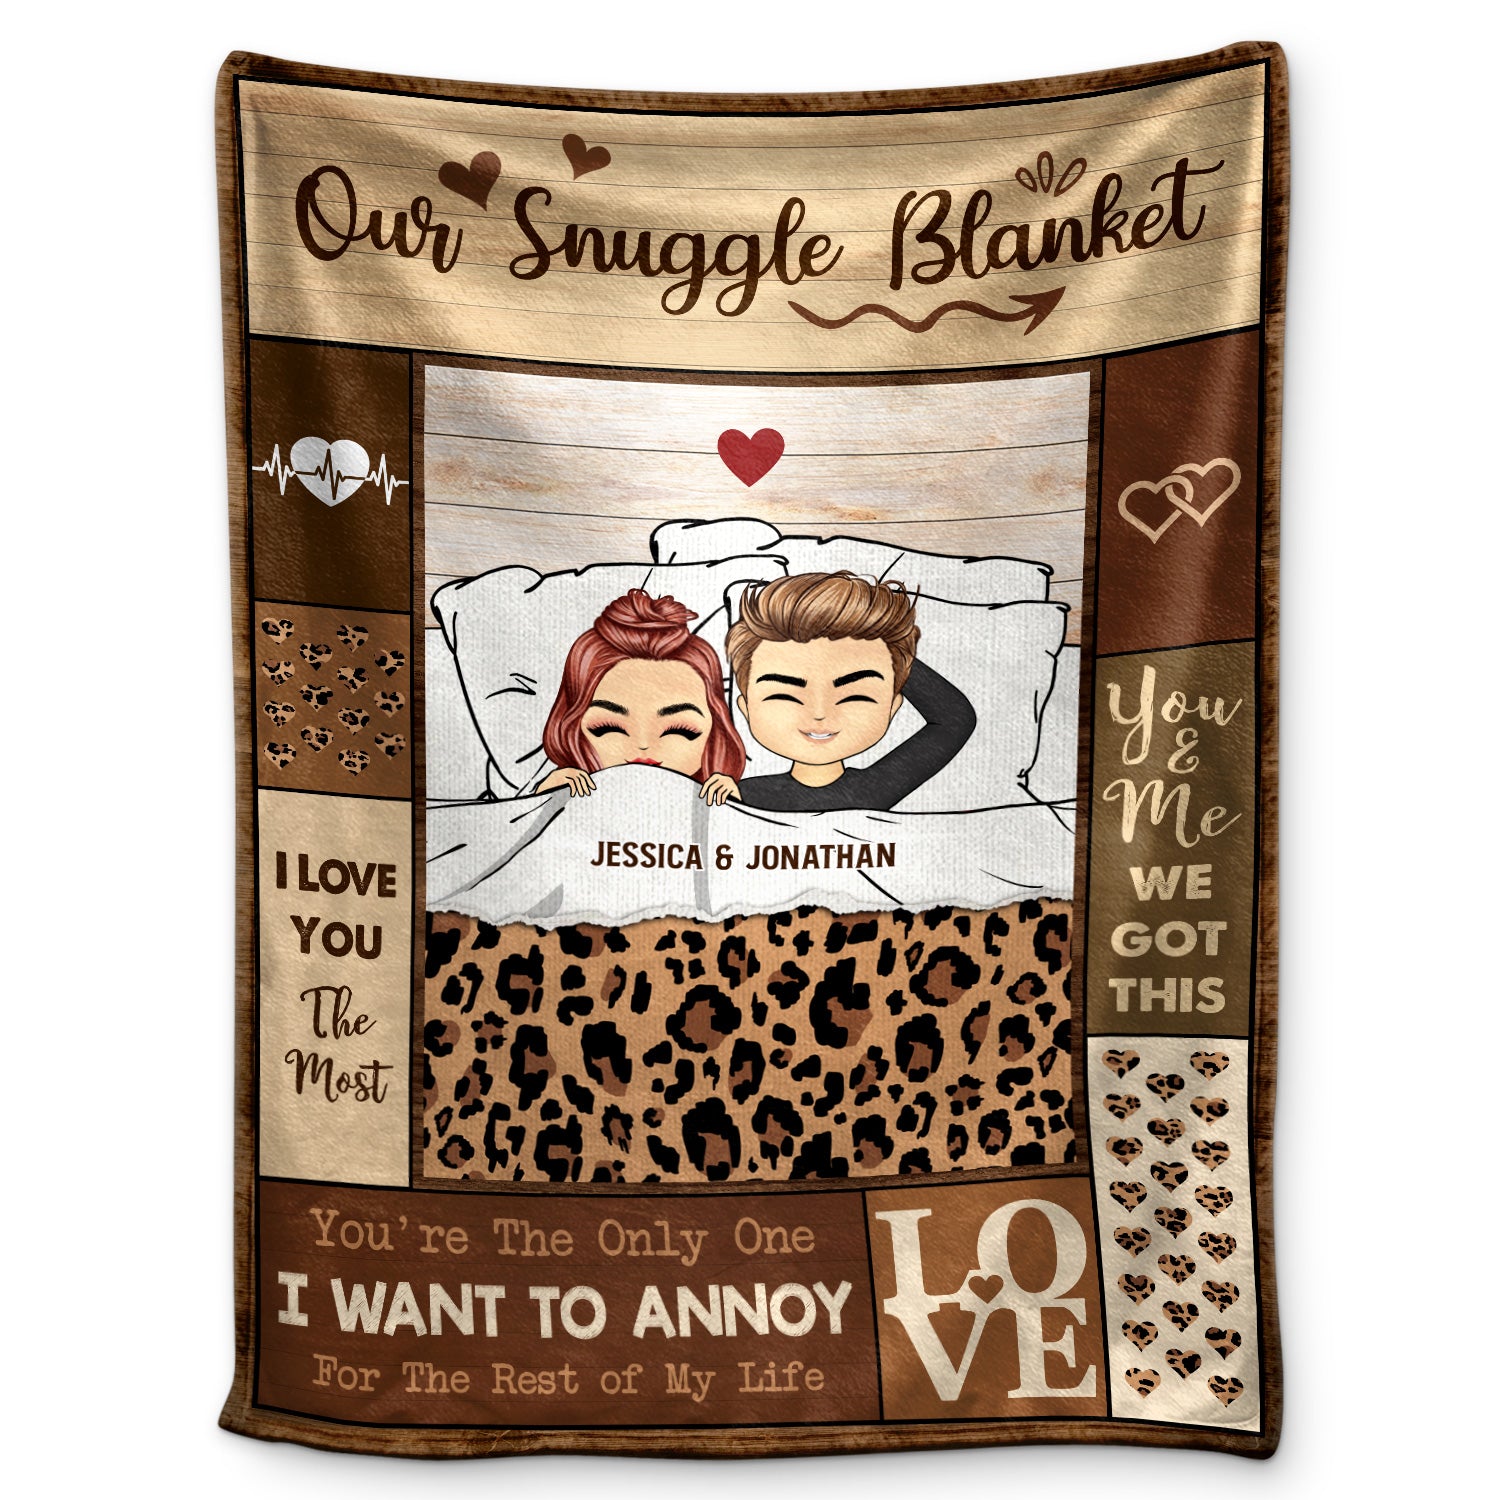 Couple Chibi Snuggle Blanket You're The Only One - Gift For Couple - Personalized Custom Fleece Blanket